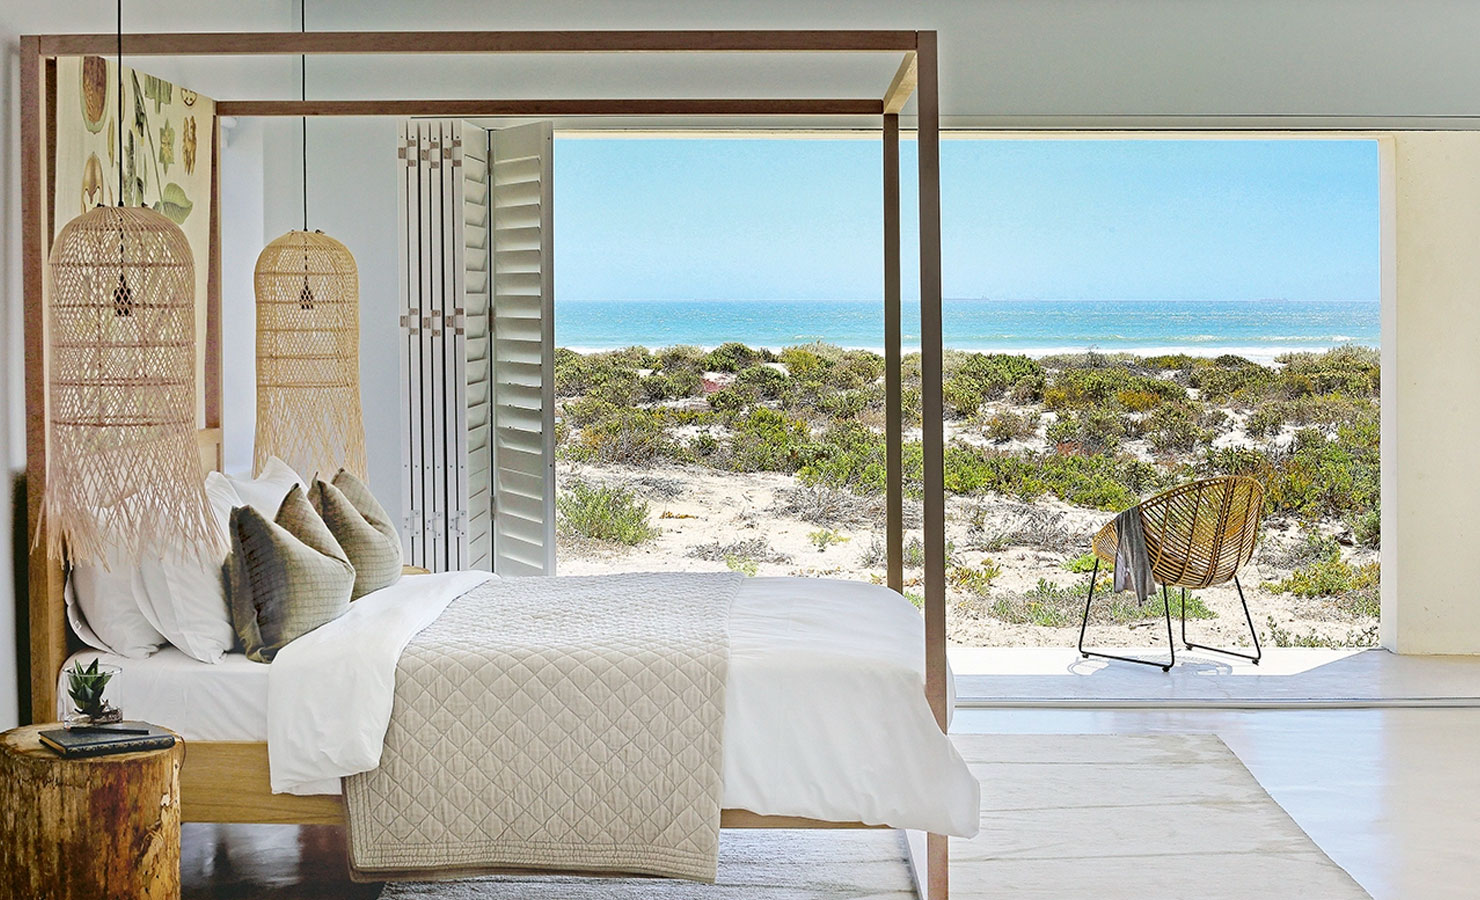 An idyllic dune side bedroom view at Dwarskersbos, on South Africa’s West Coast